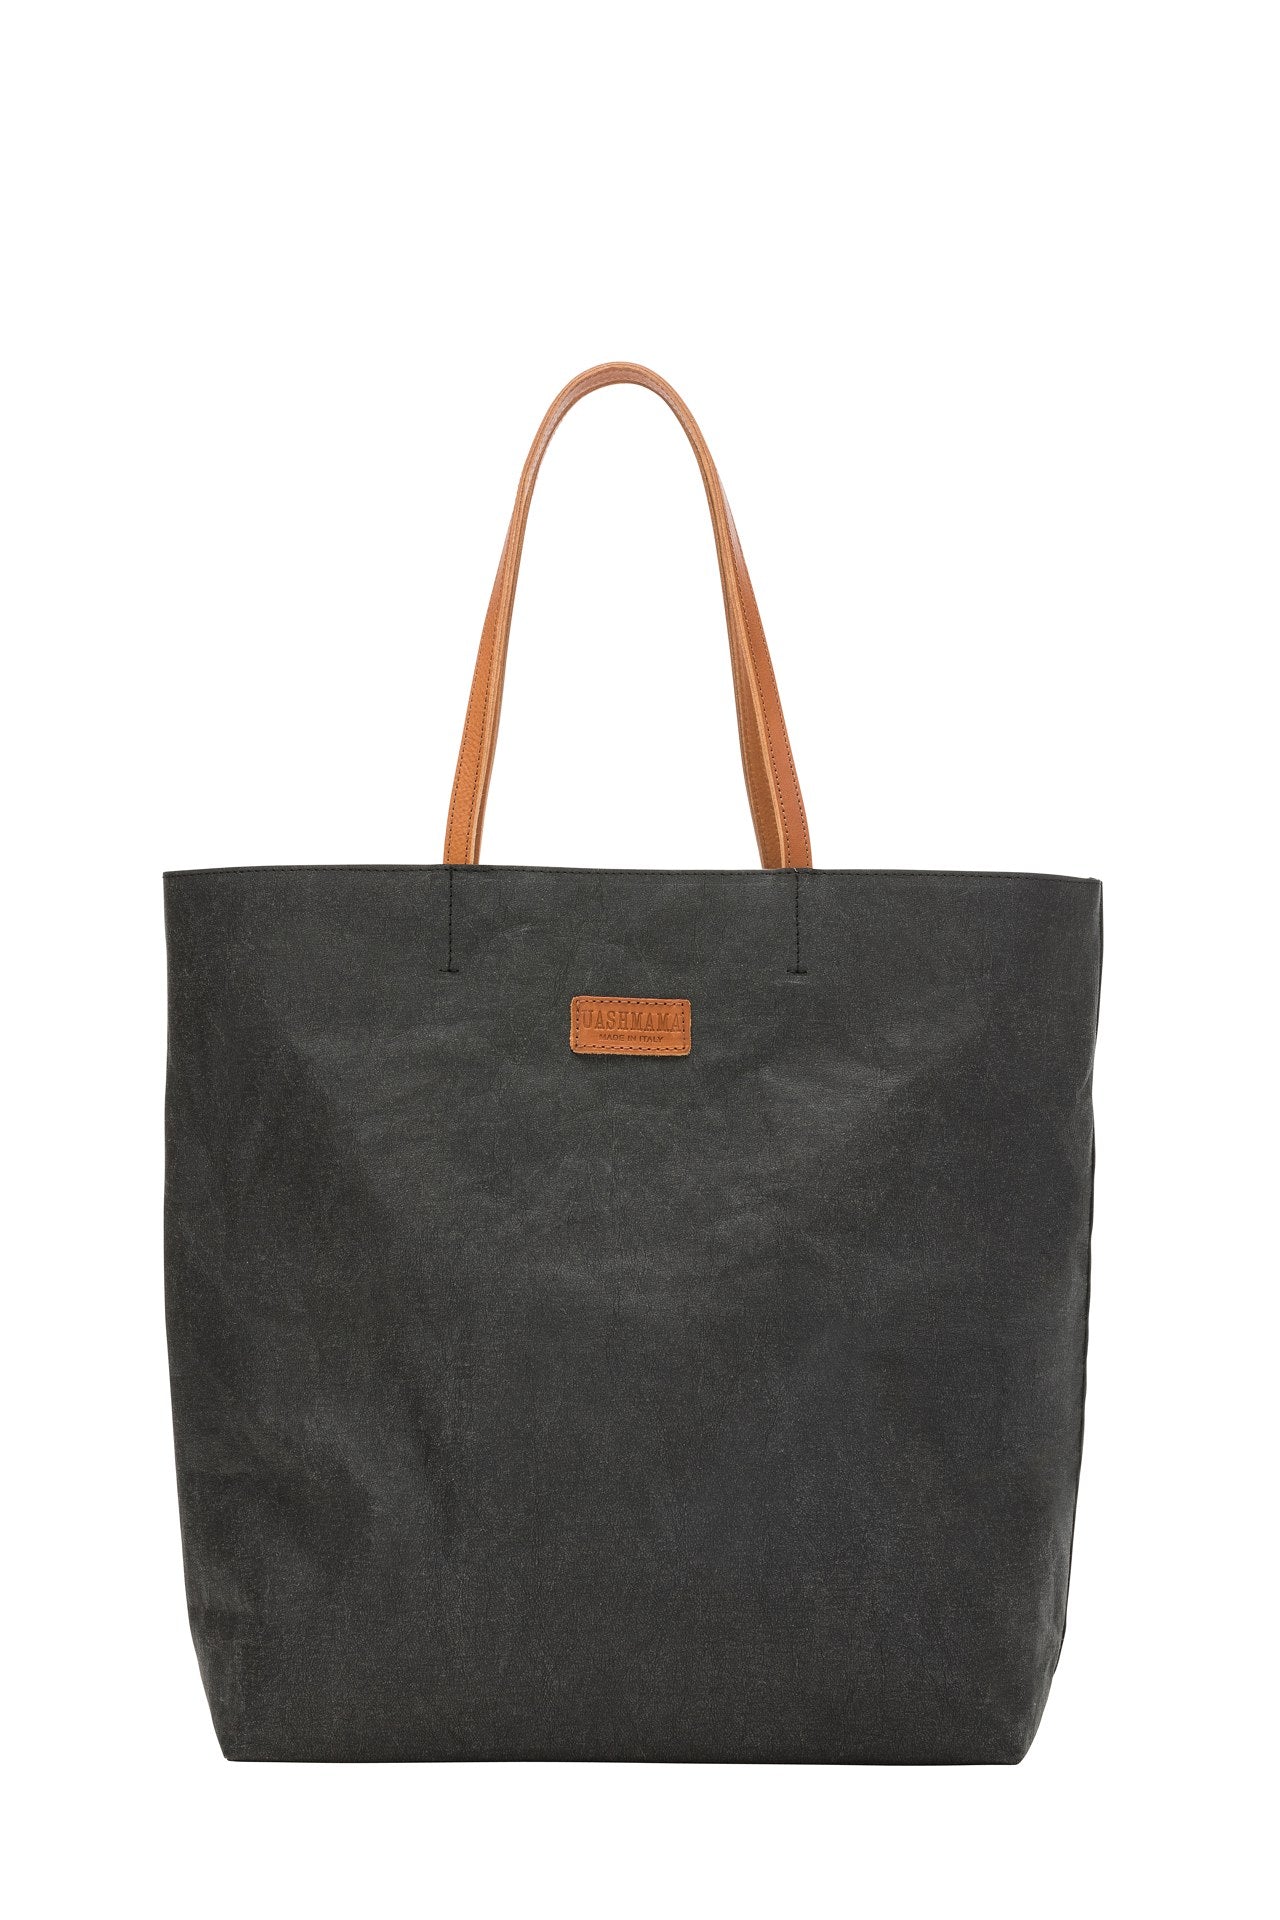 A washable paper tote back is shown. It has two long leather handles and small leather UASHMAMA label on the front. It is shown in black with tan handles and label.